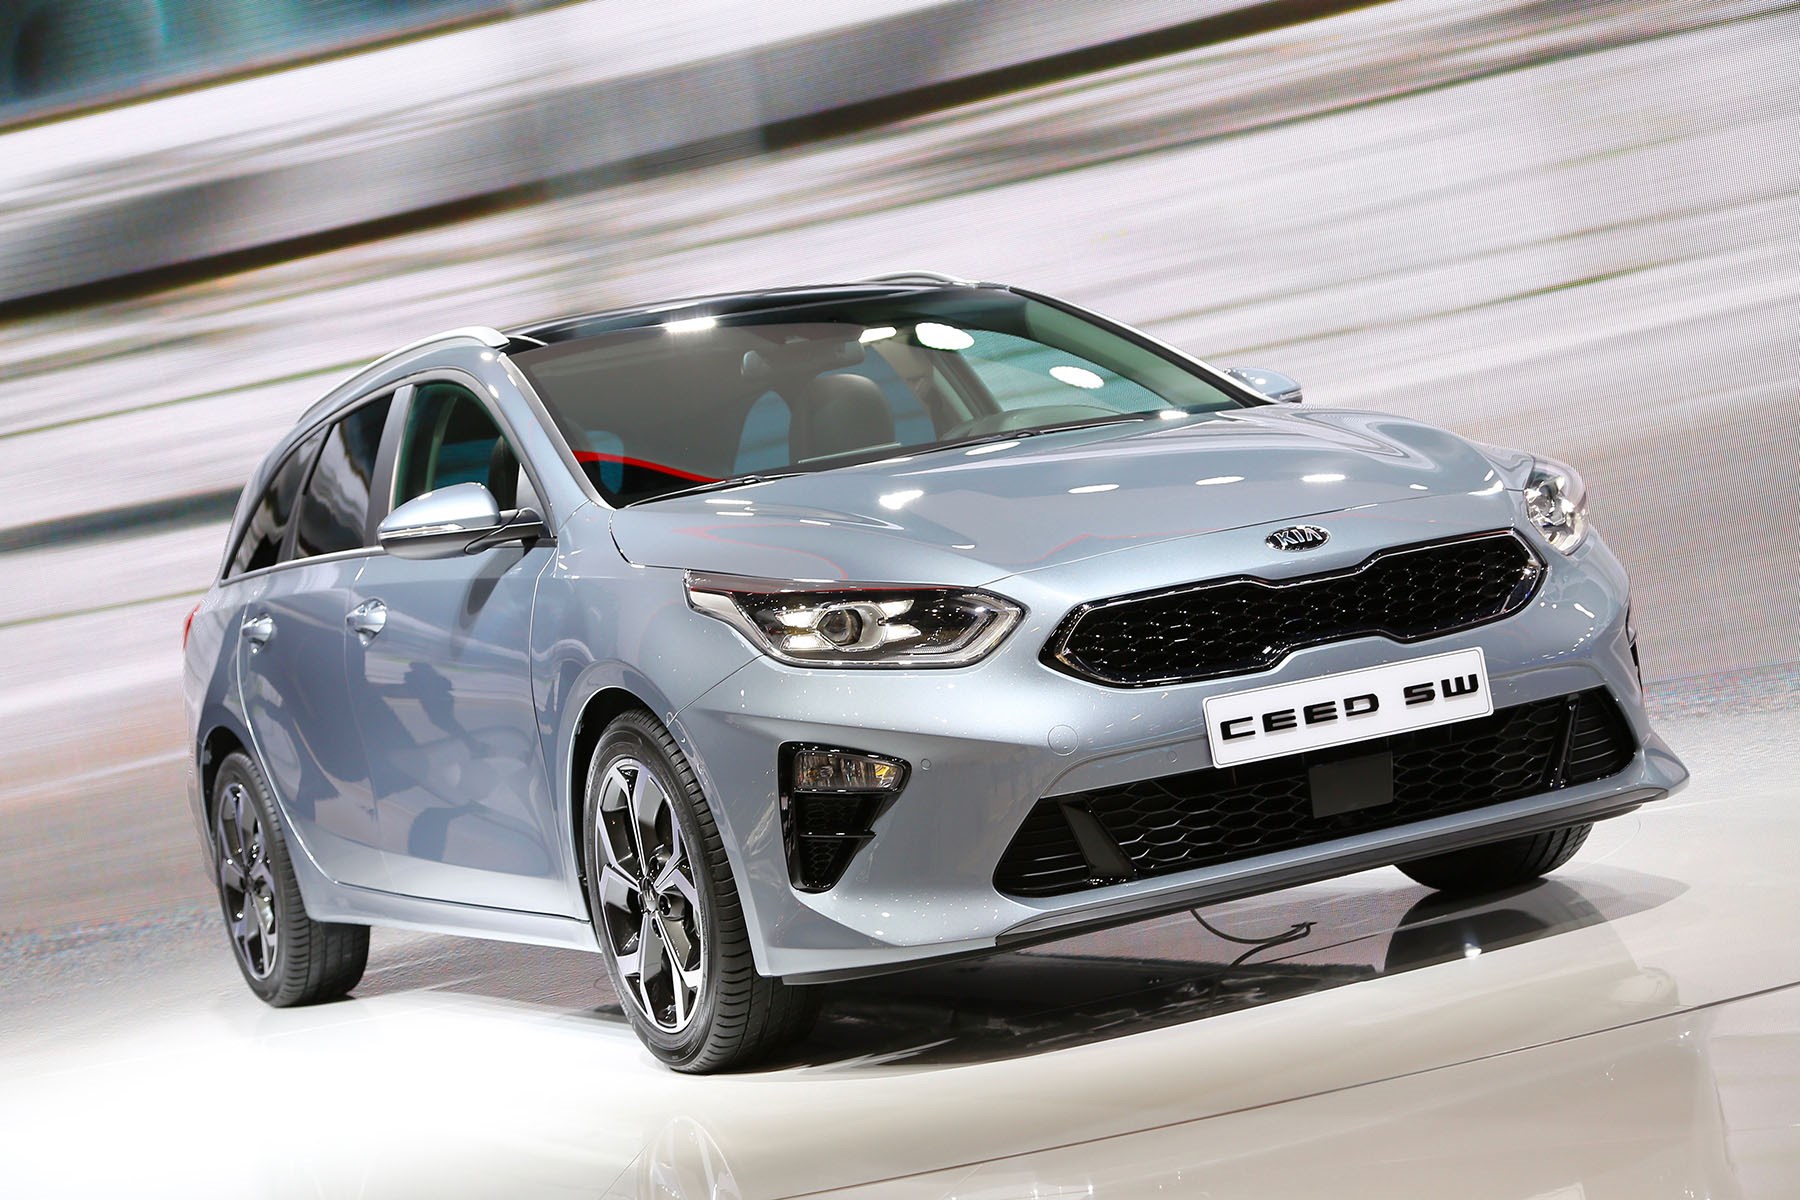 2022 Kia Ceed Facelift Revealed With New Lights, Redesigned Grille